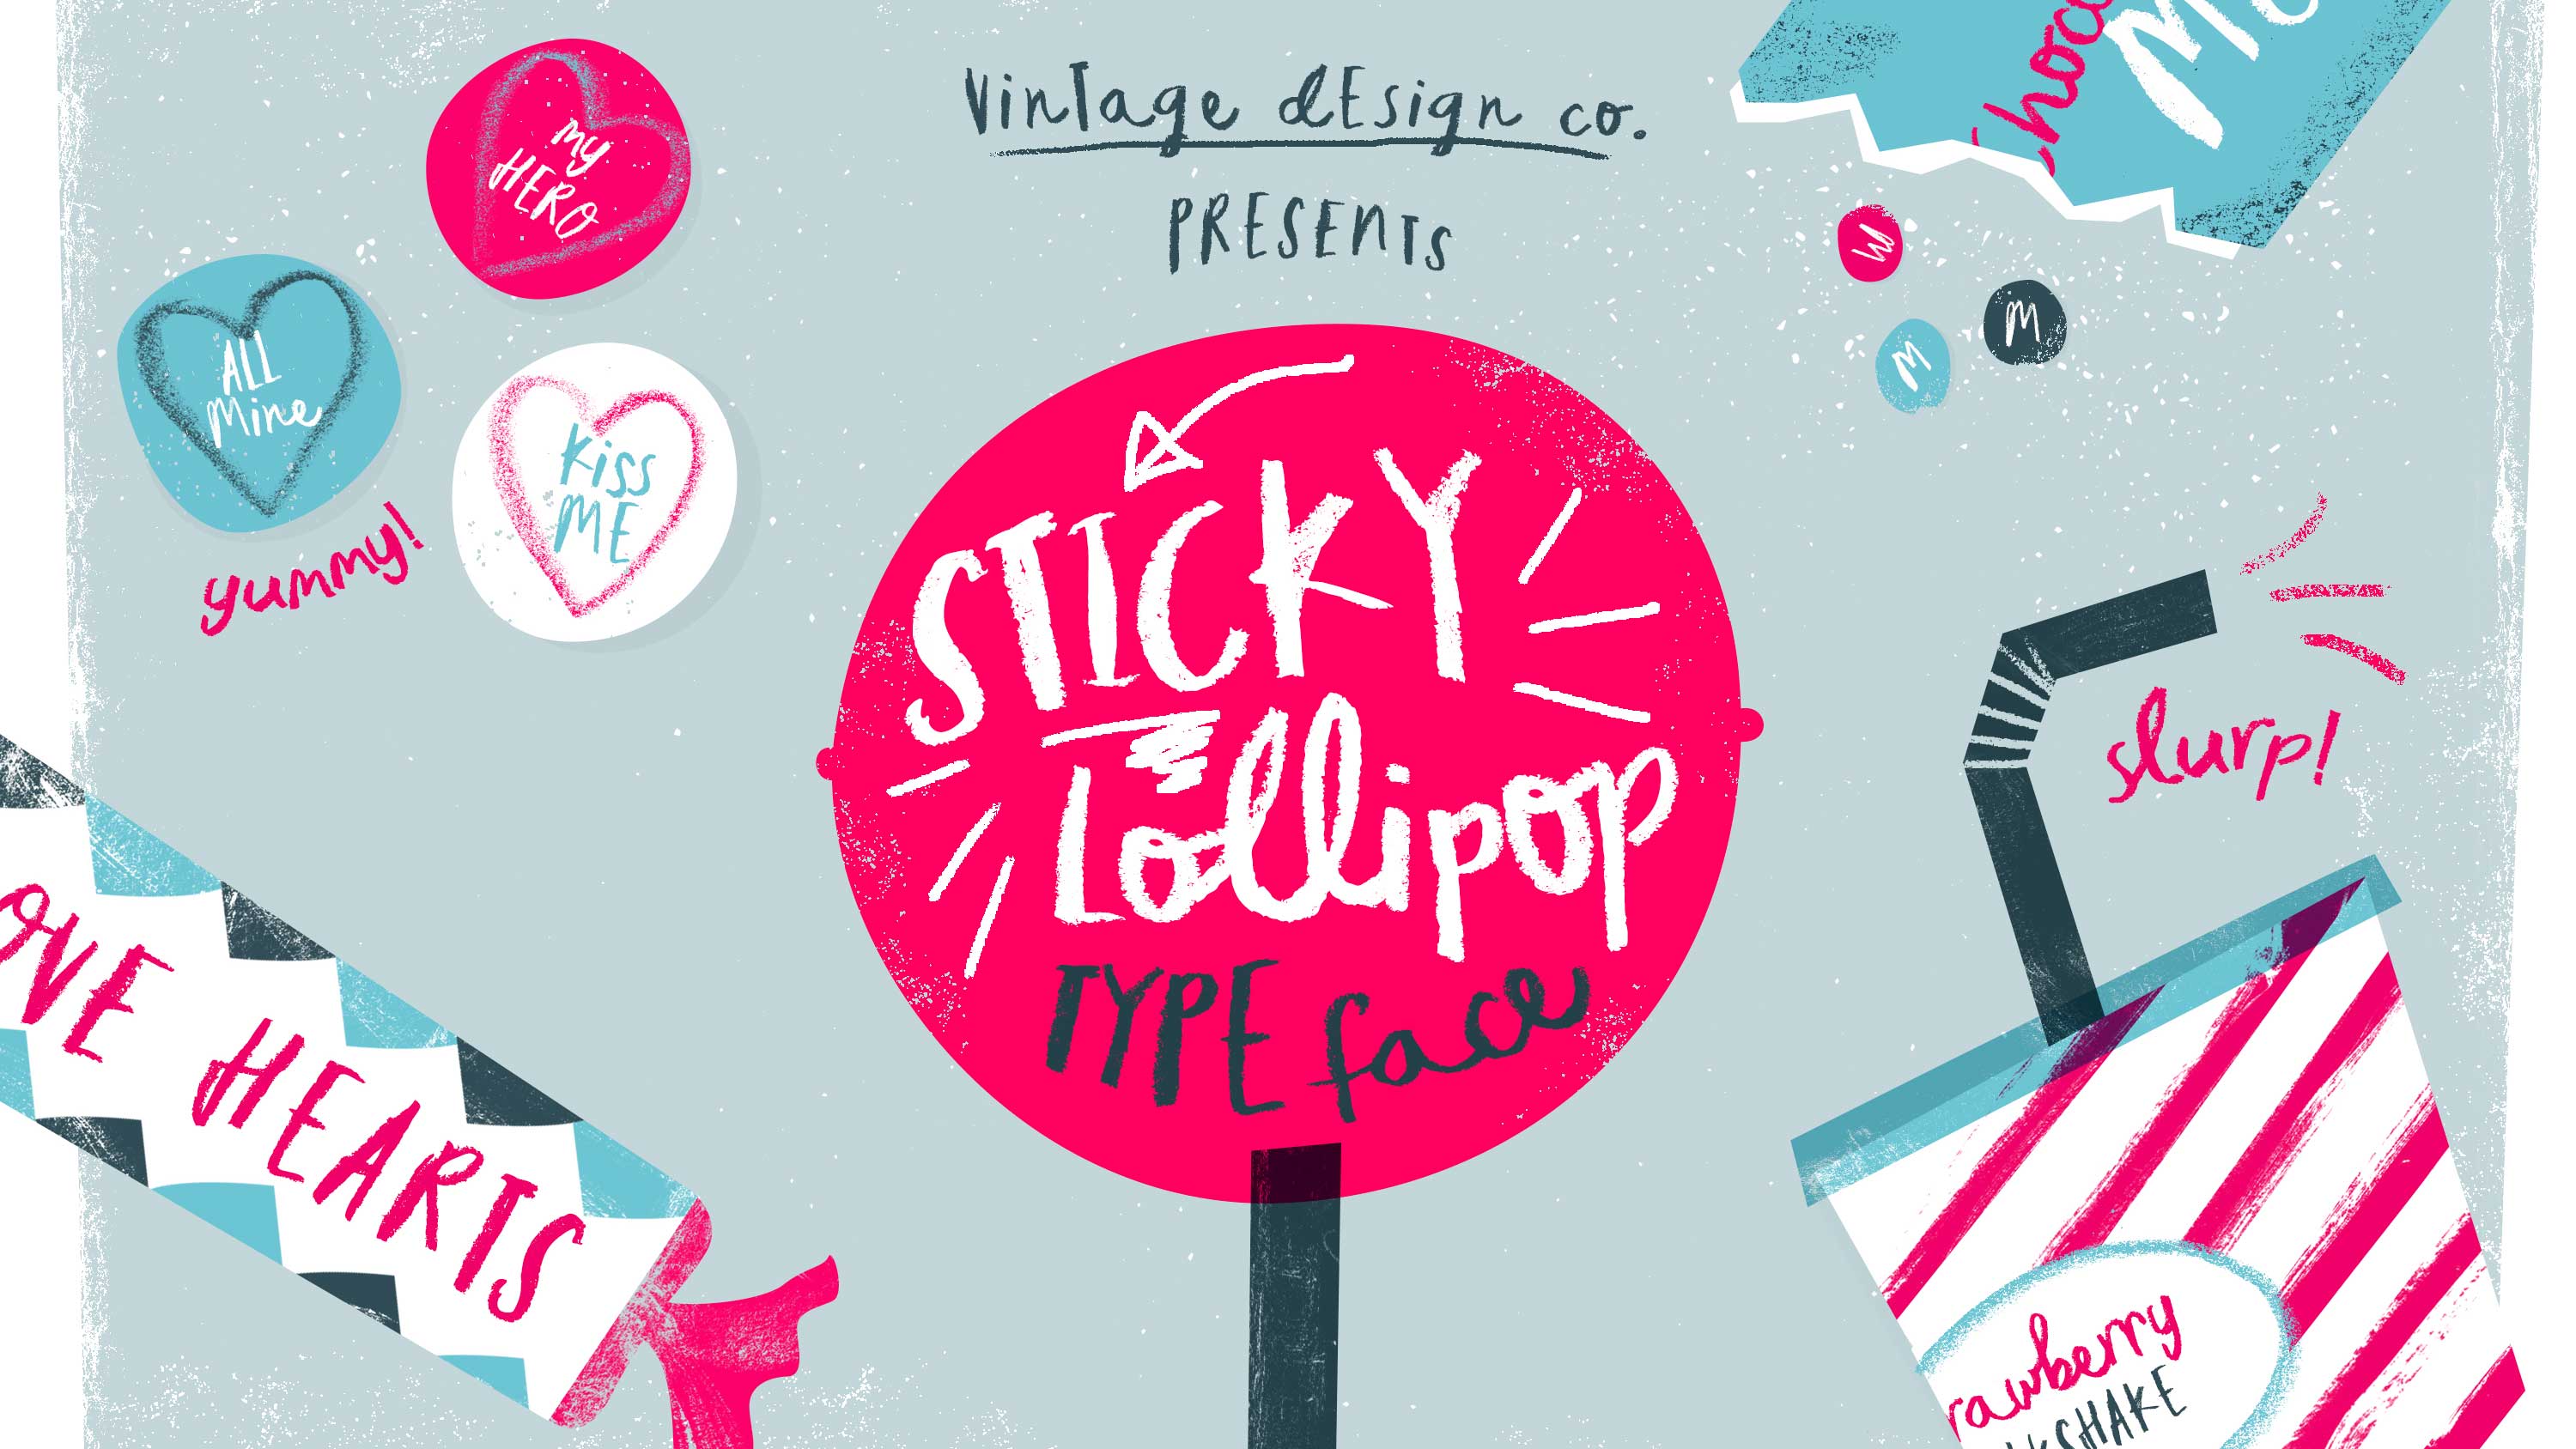 Best graphic design tools for May: Sticky Lollipop